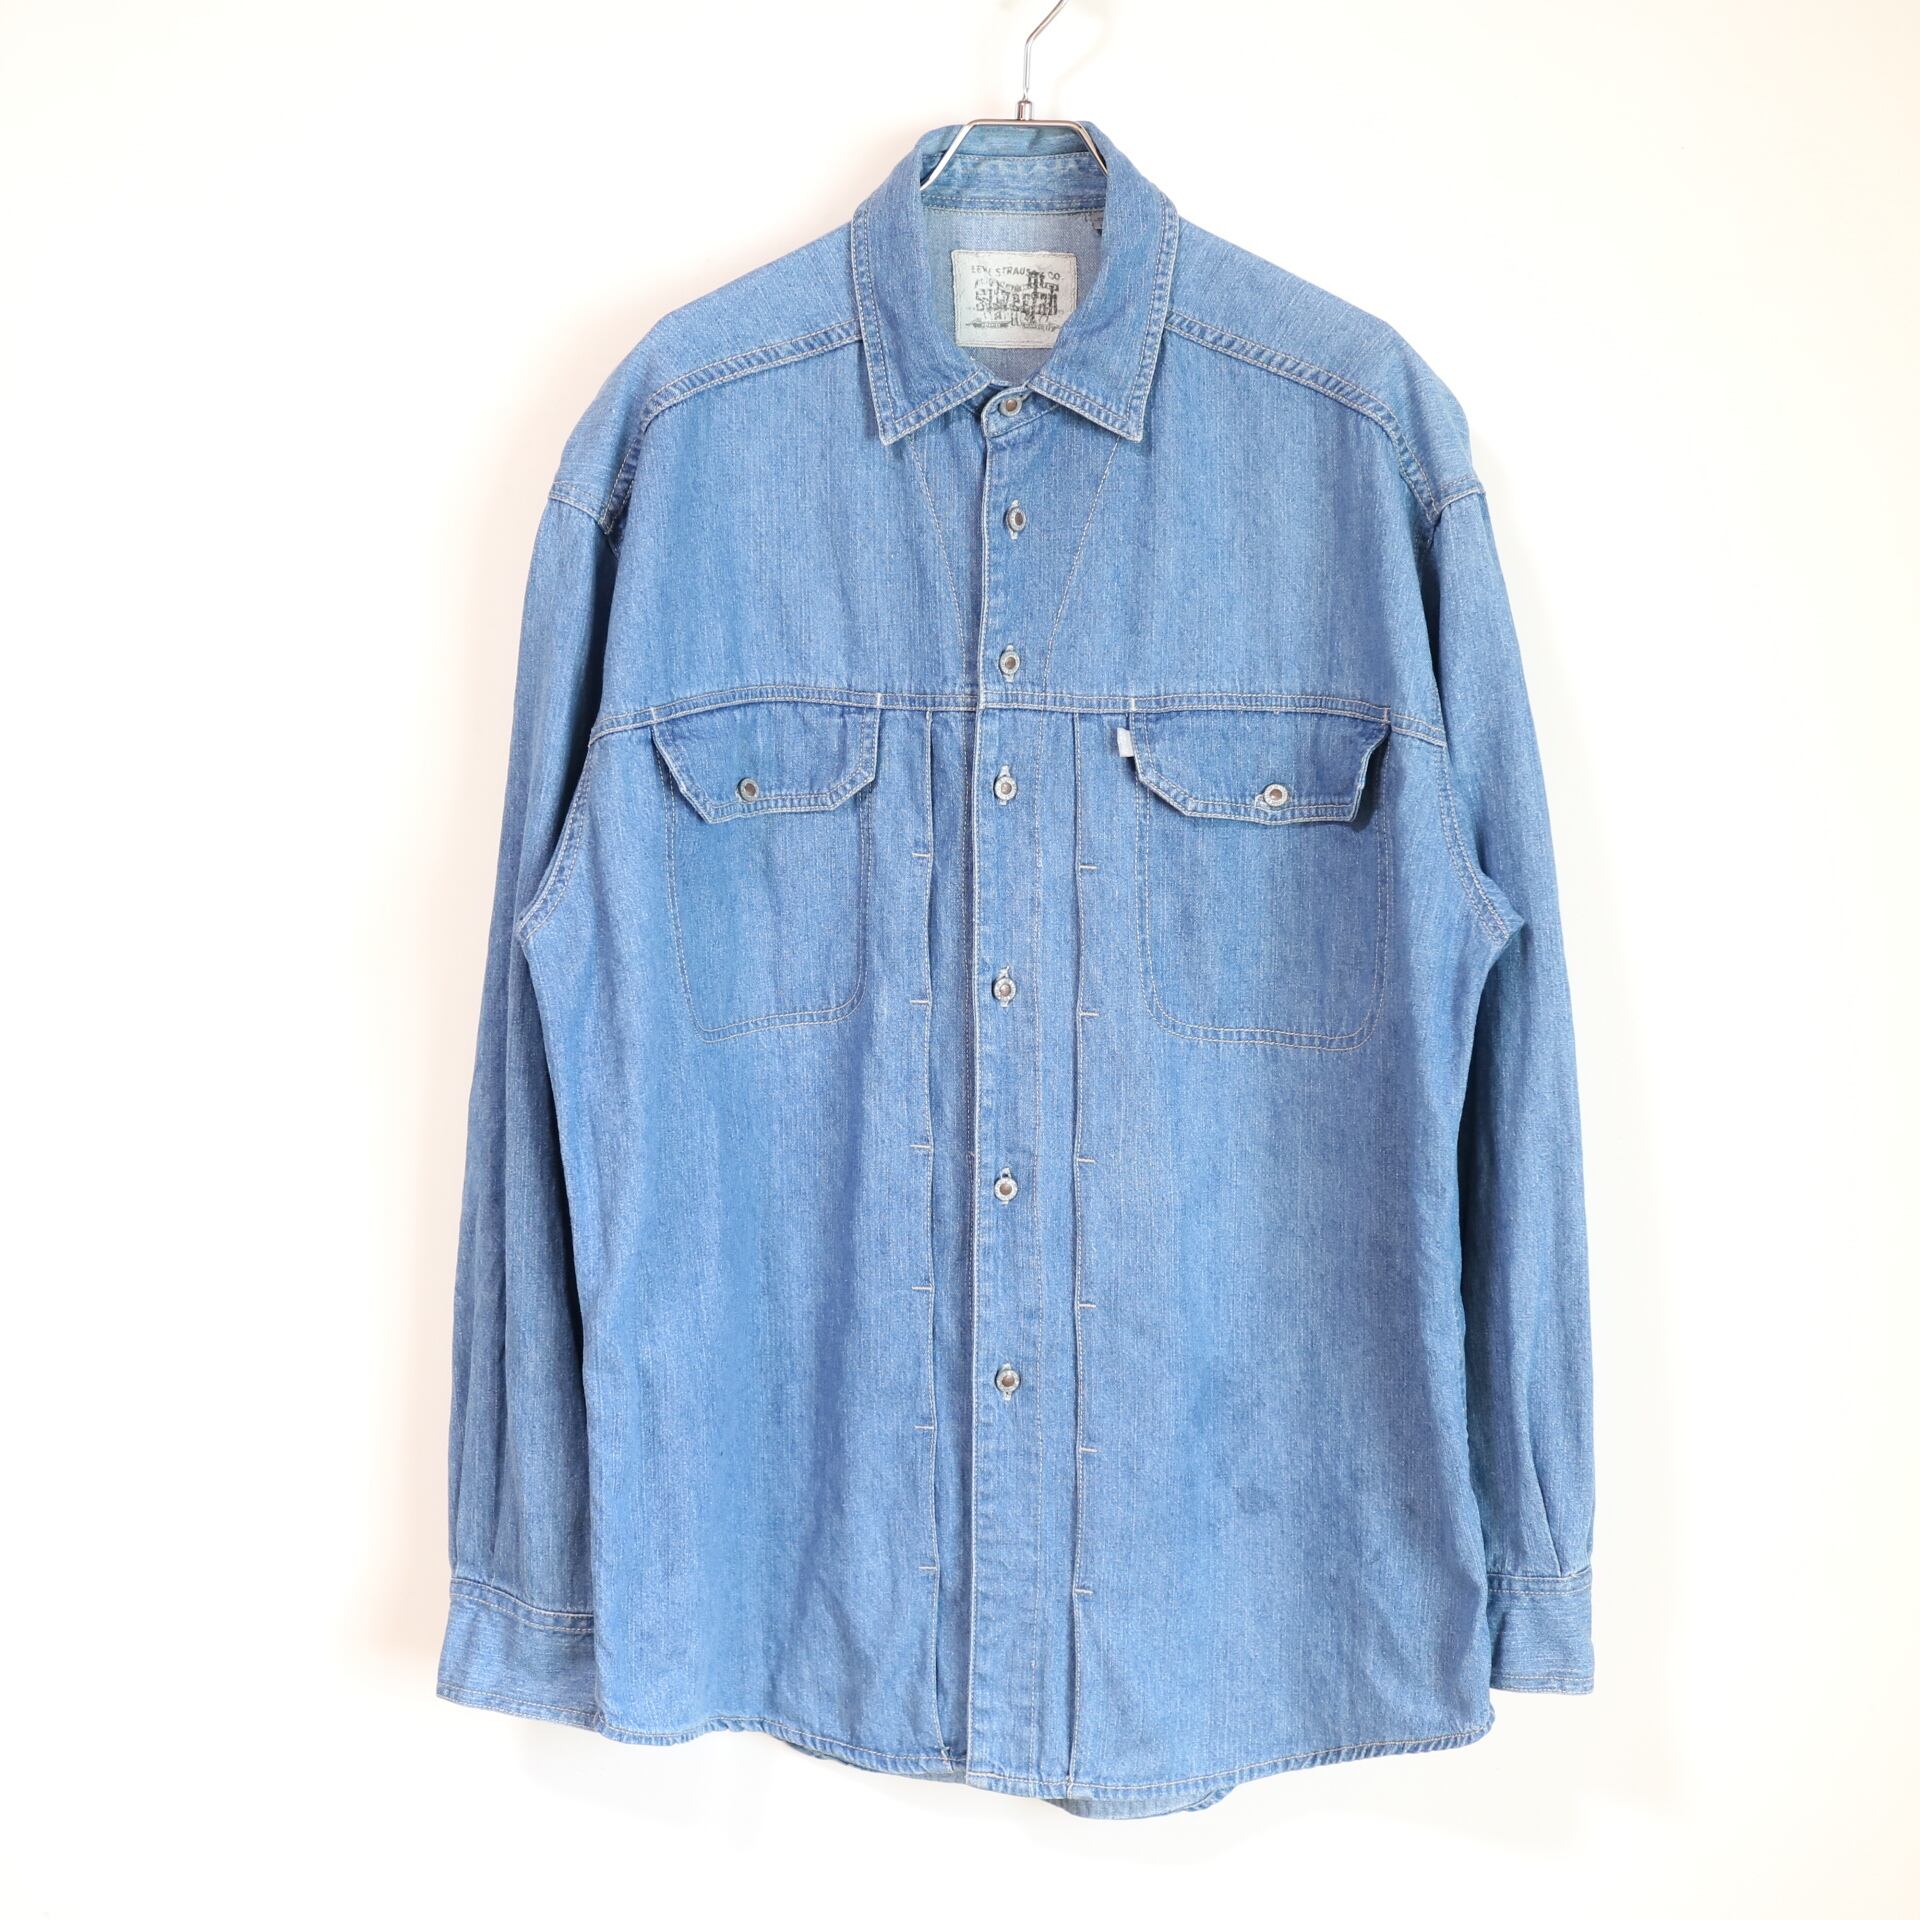 Levi's Silver Tab / 90's Vintage Denim Shirt / Made in Indonesia